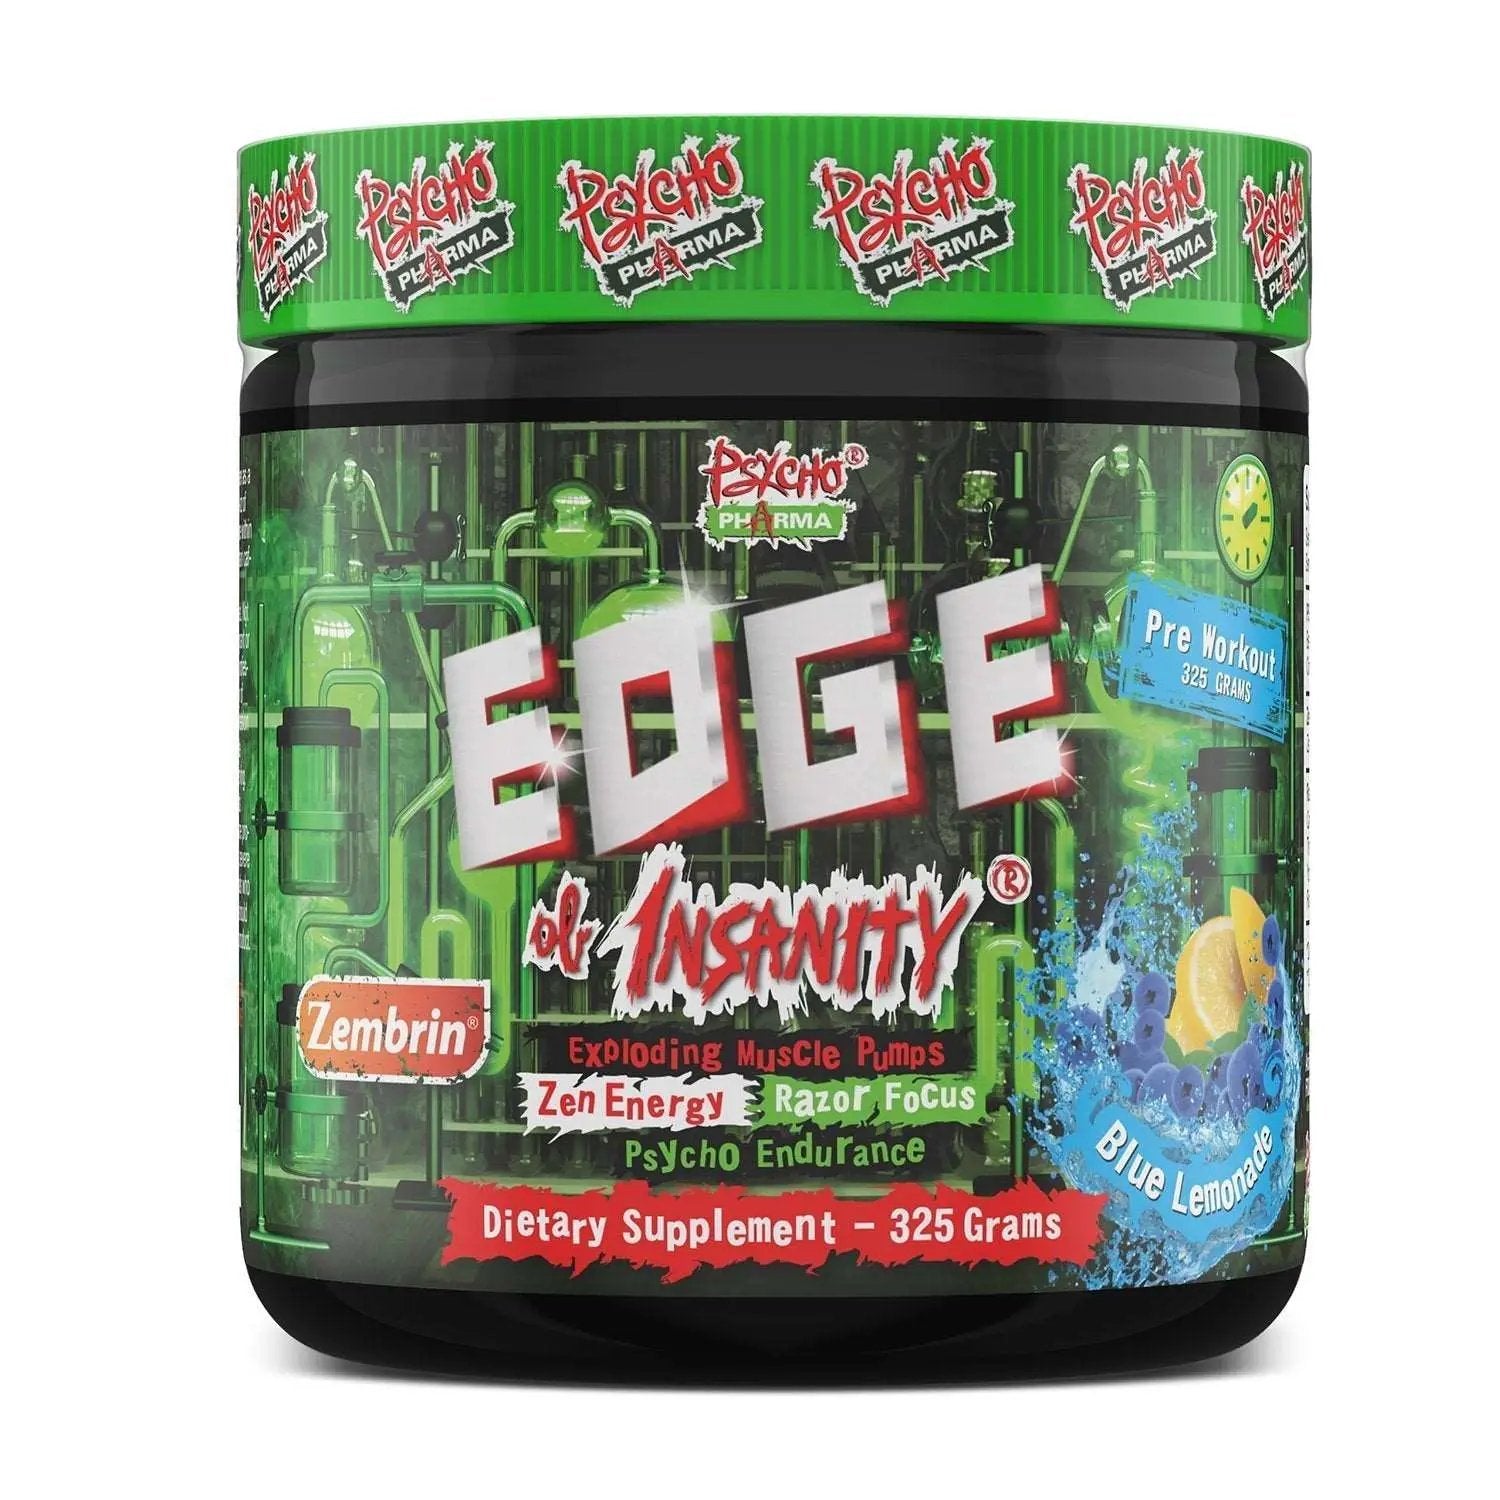 Edge of Insanity Pre Workout